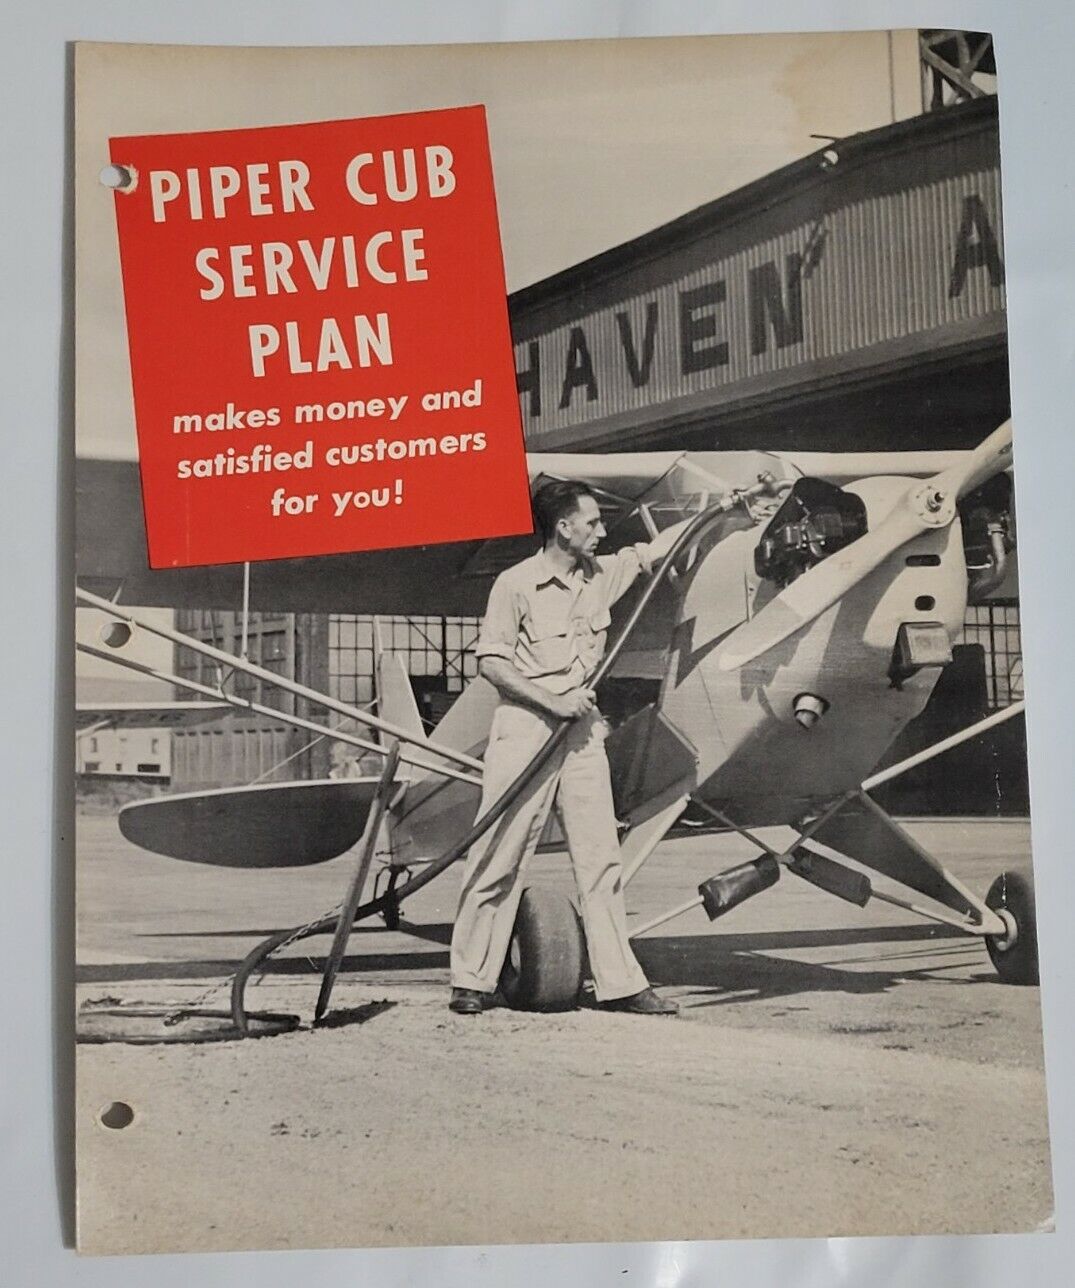 Vintage 1950's Piper Cub Service Plan Airplane Promotion Advertising Flyer